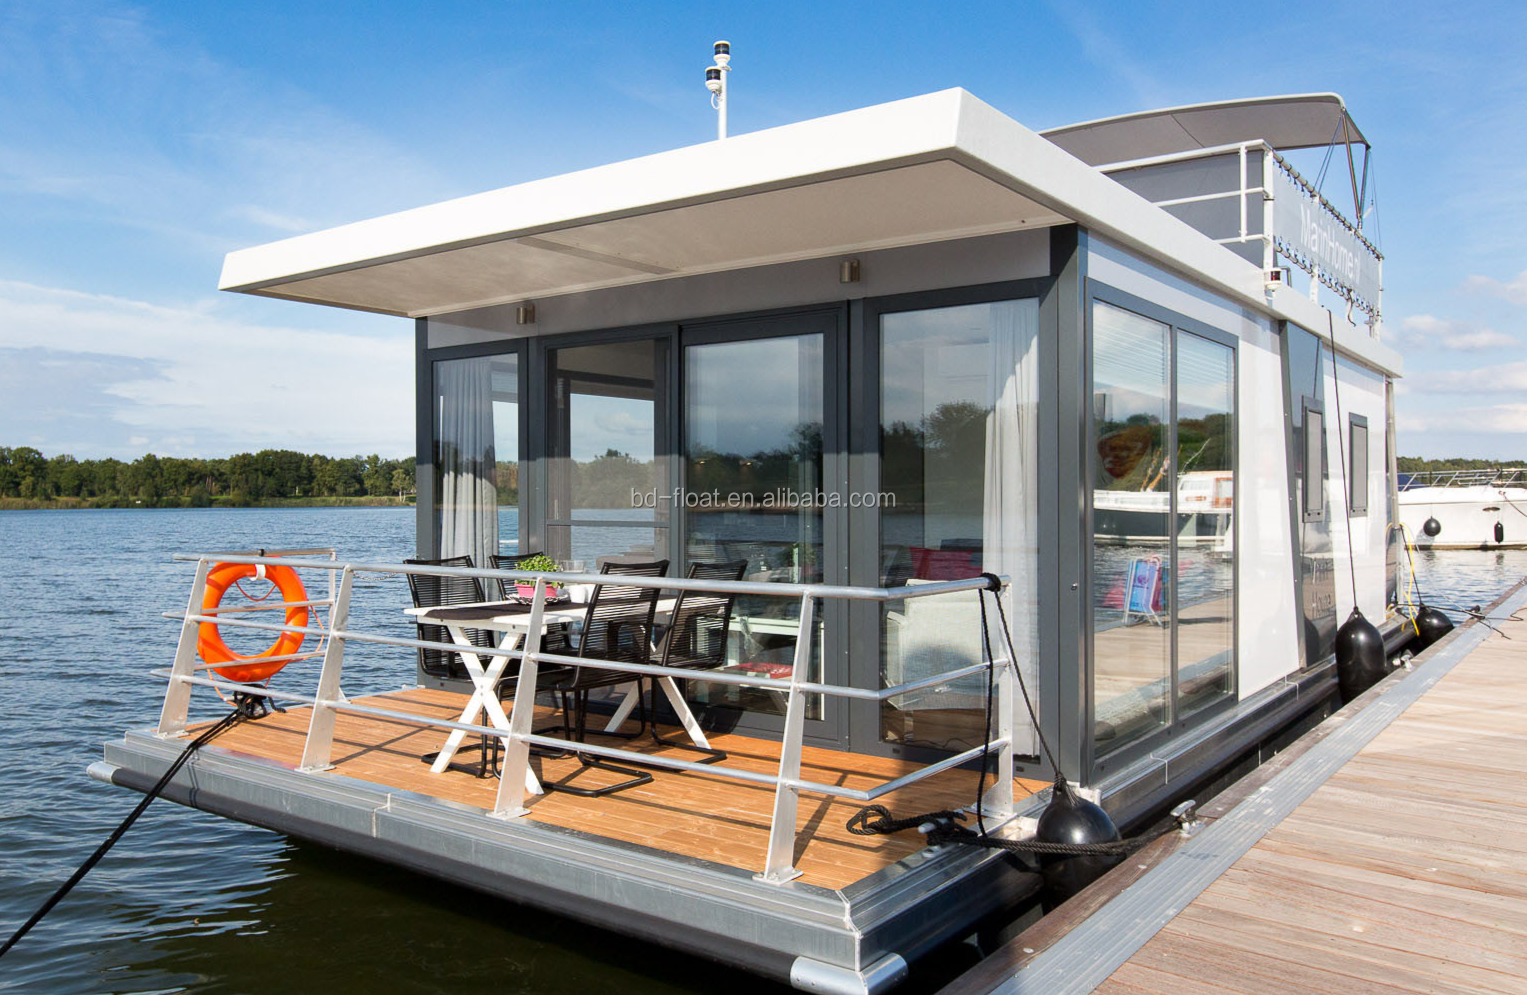 How to discover the Pontoon houseboat owner? post thumbnail image